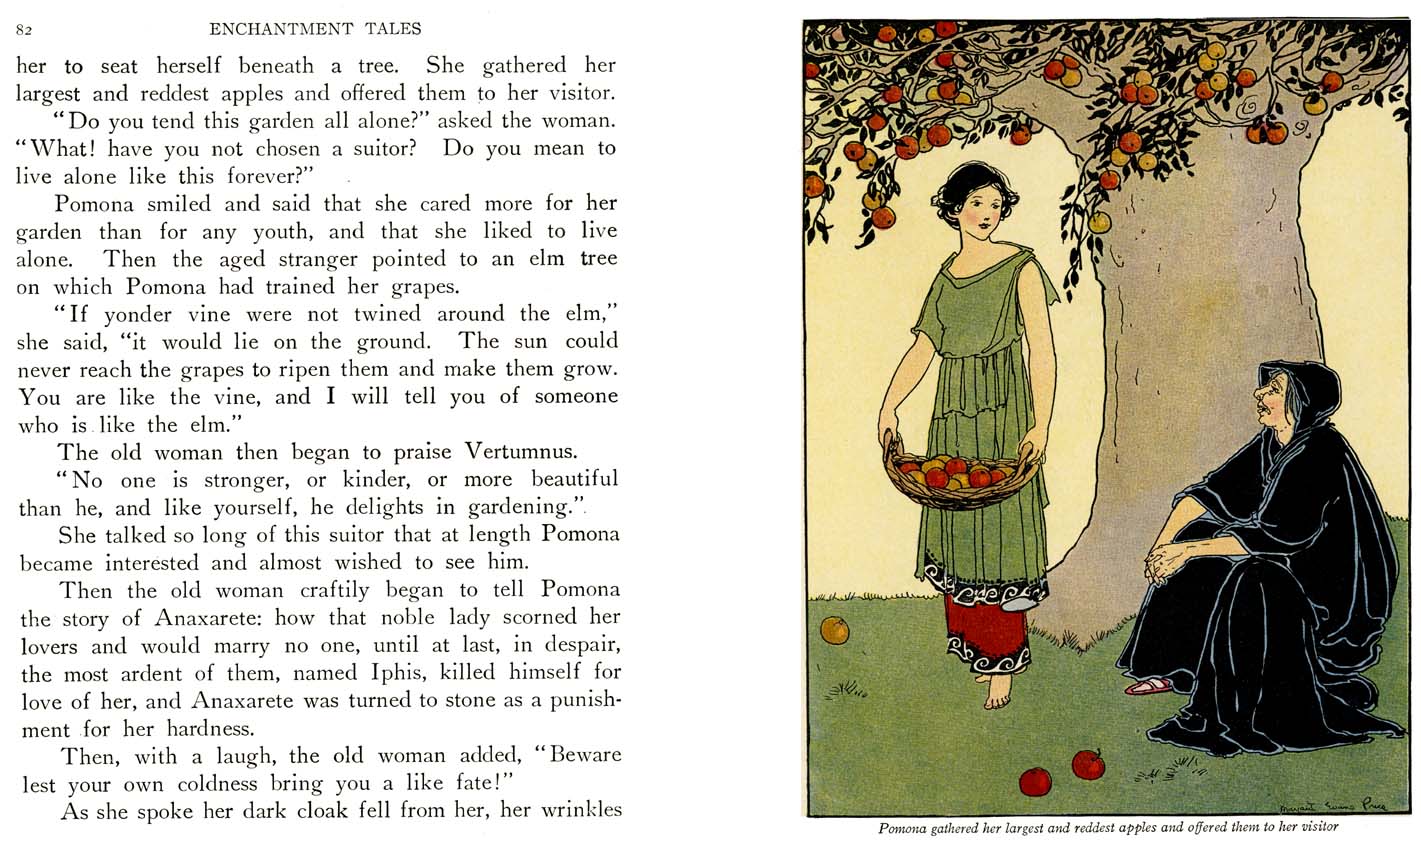 43_Enchantment_Tales_for_Children